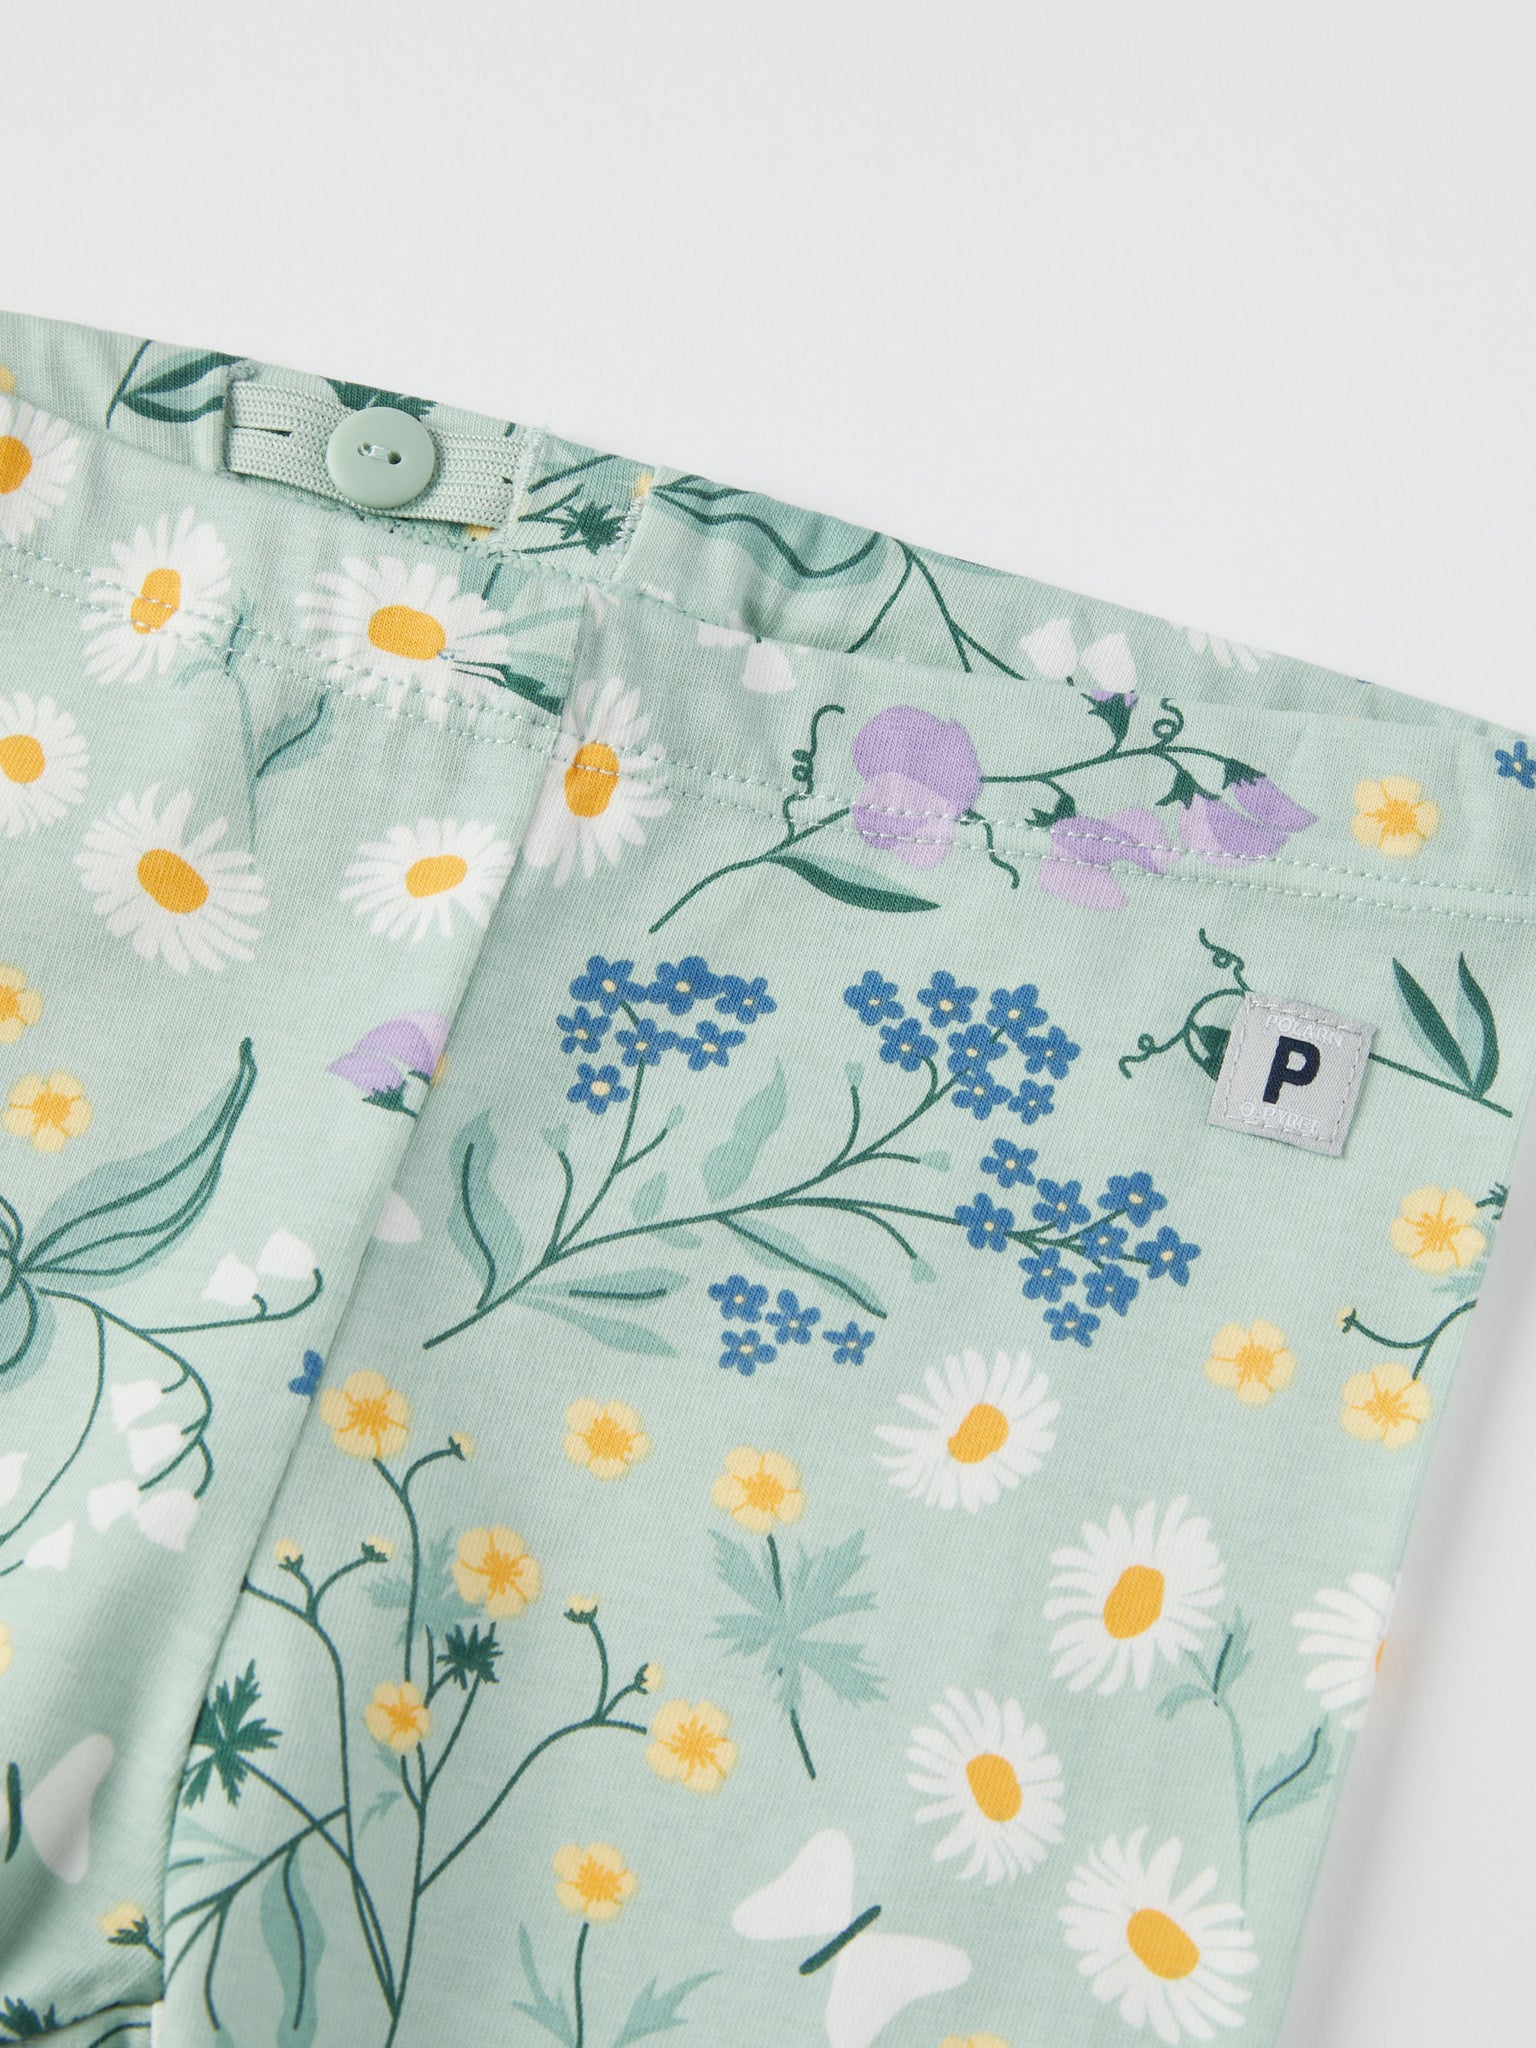 Ditsy Floral Baby Leggings from the Polarn O. Pyret baby collection. Clothes made using sustainably sourced materials.